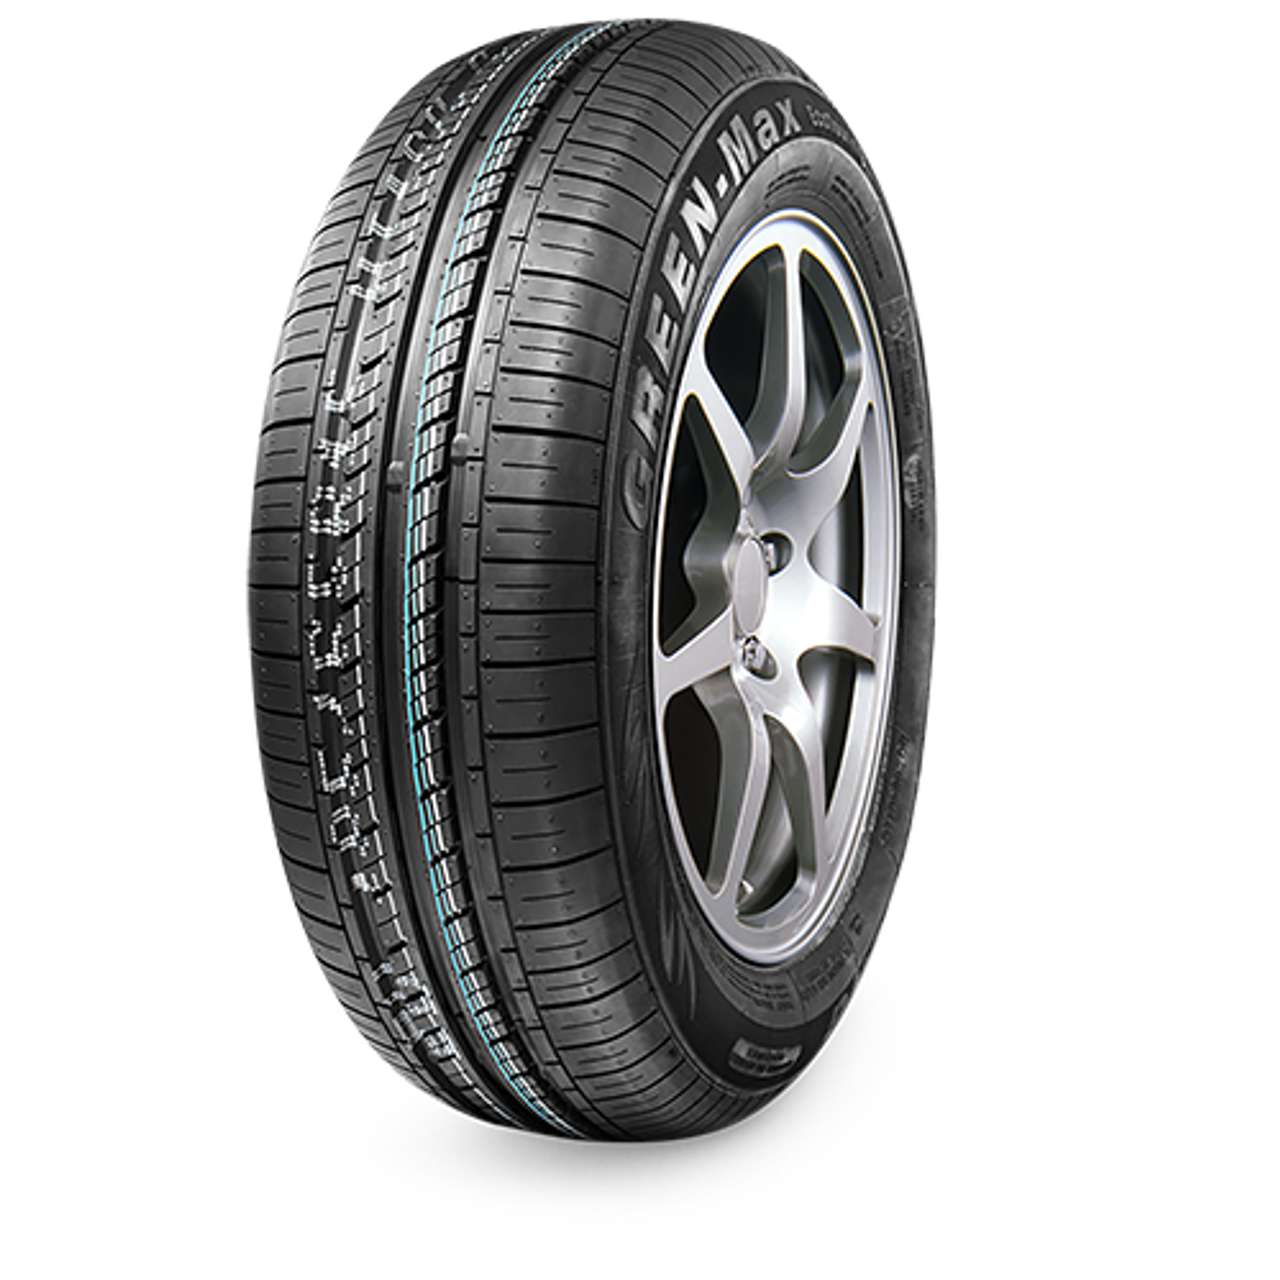 LINGLONG GREEN-MAX ECOTOURING 175/65R13 80T BSW von LINGLONG